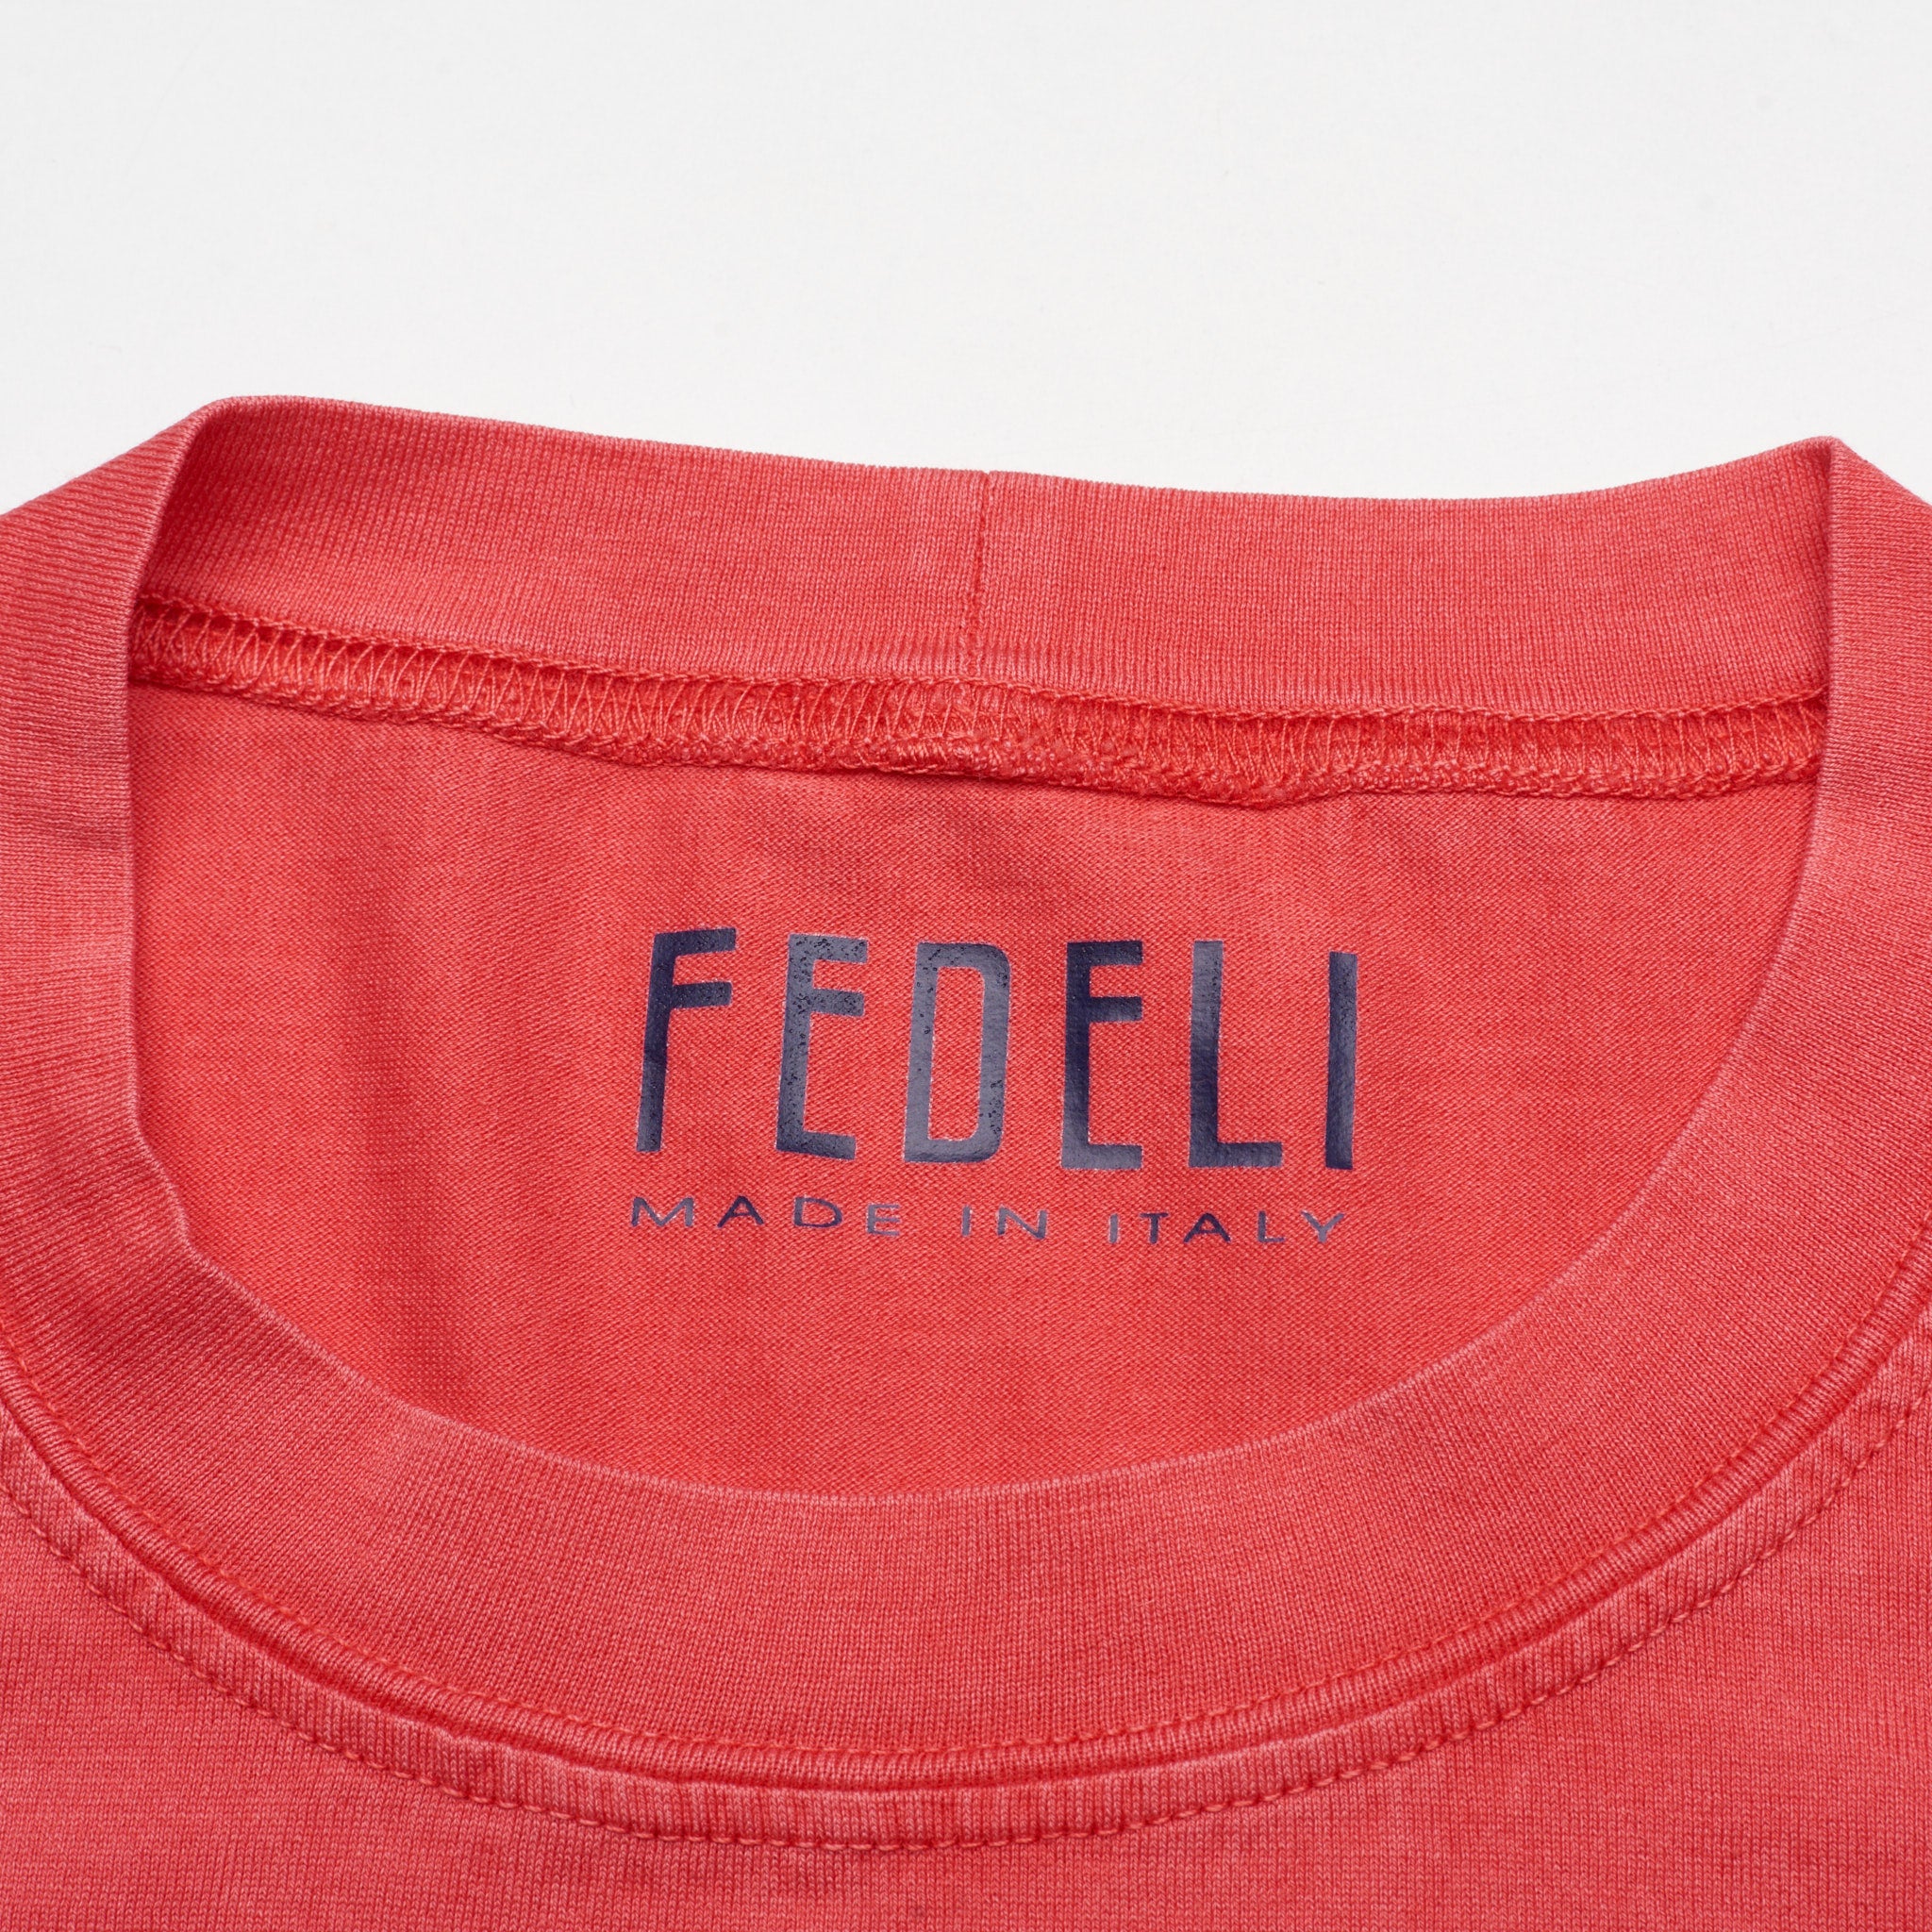 FEDELI "Extreme" Coral Cotton Frosted Short Sleeve T-Shirt EU 48 NEW US S FEDELI